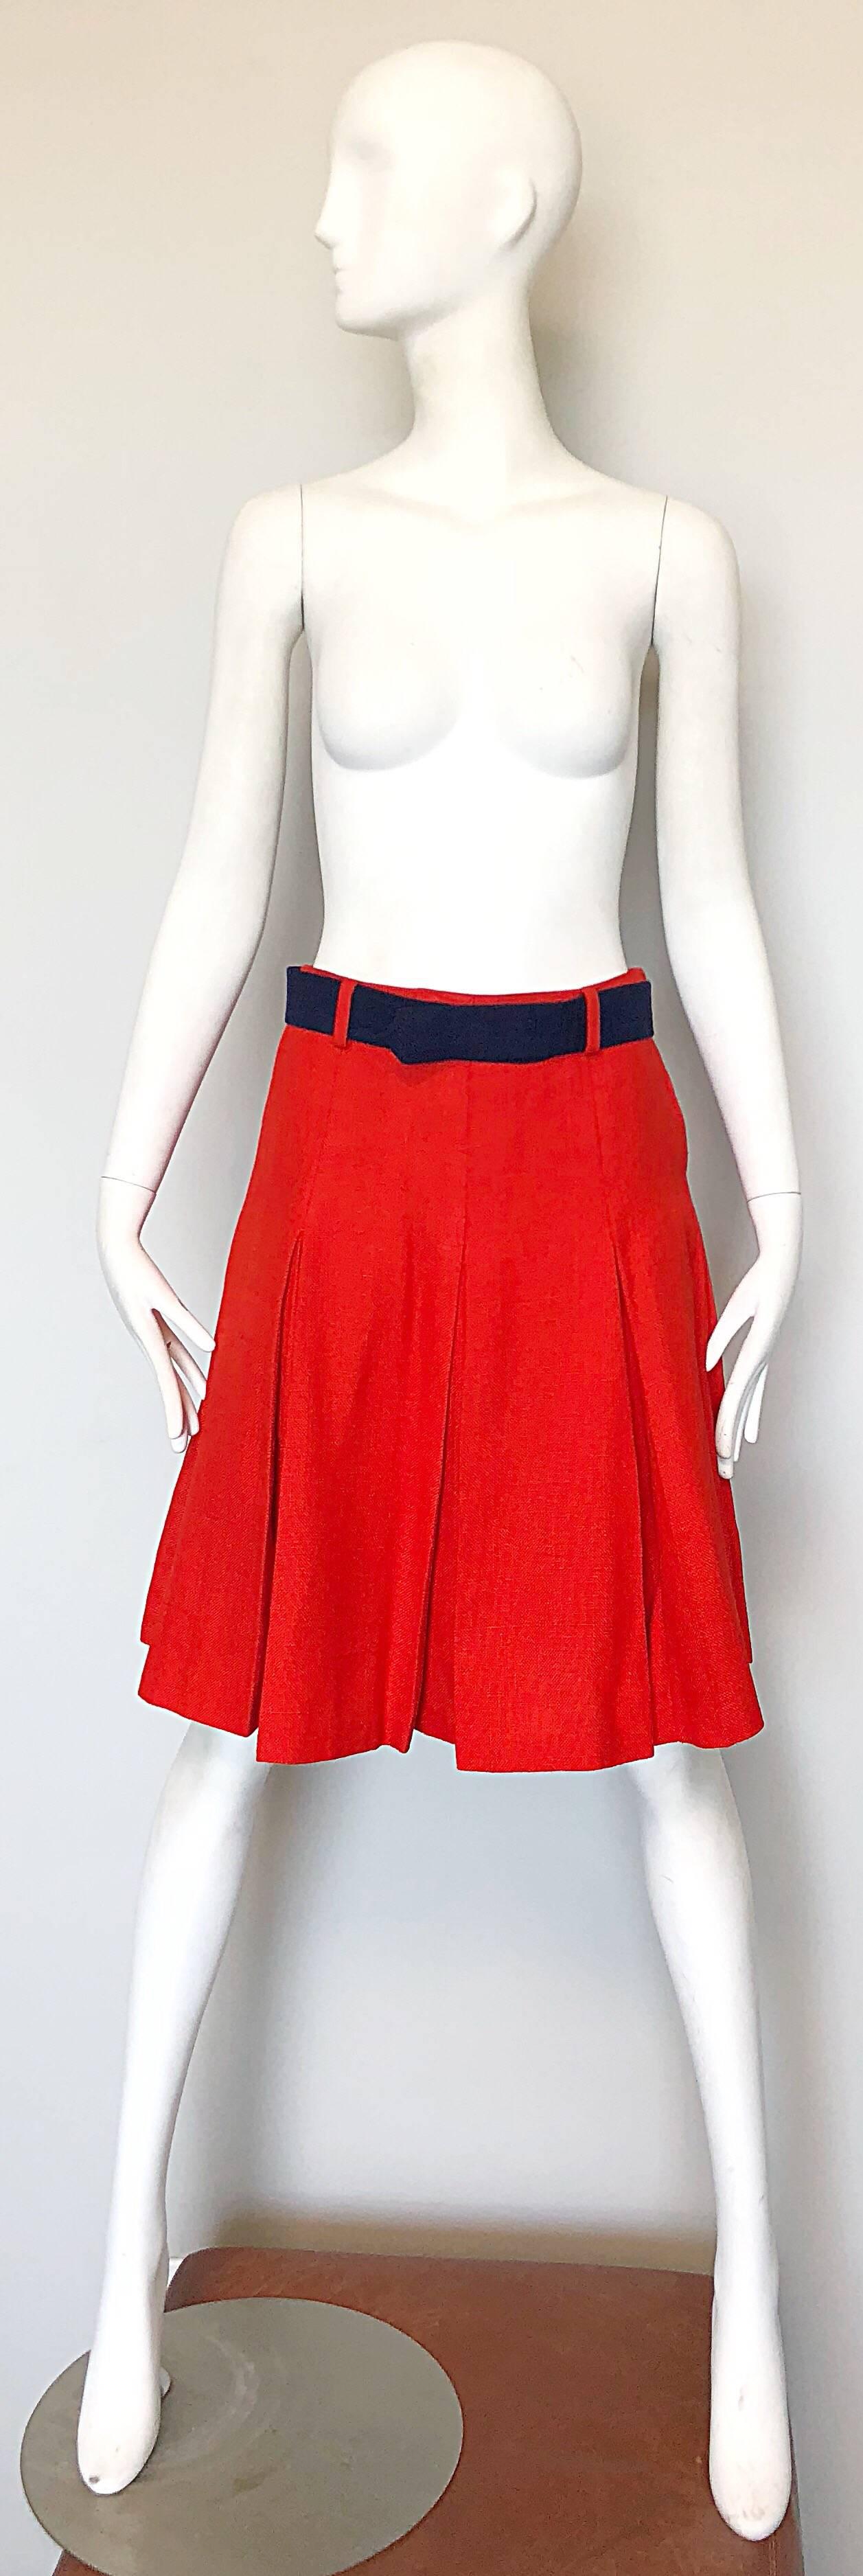 Chic 60s CARDINALI original sample orange and navy blue Irish linen belted nautical scooter skirt! This rare gem hails from the actual designer's estate (Marilyn Lewis). Flattering super soft Irish linen holds its shape nicely. Flattering vertical